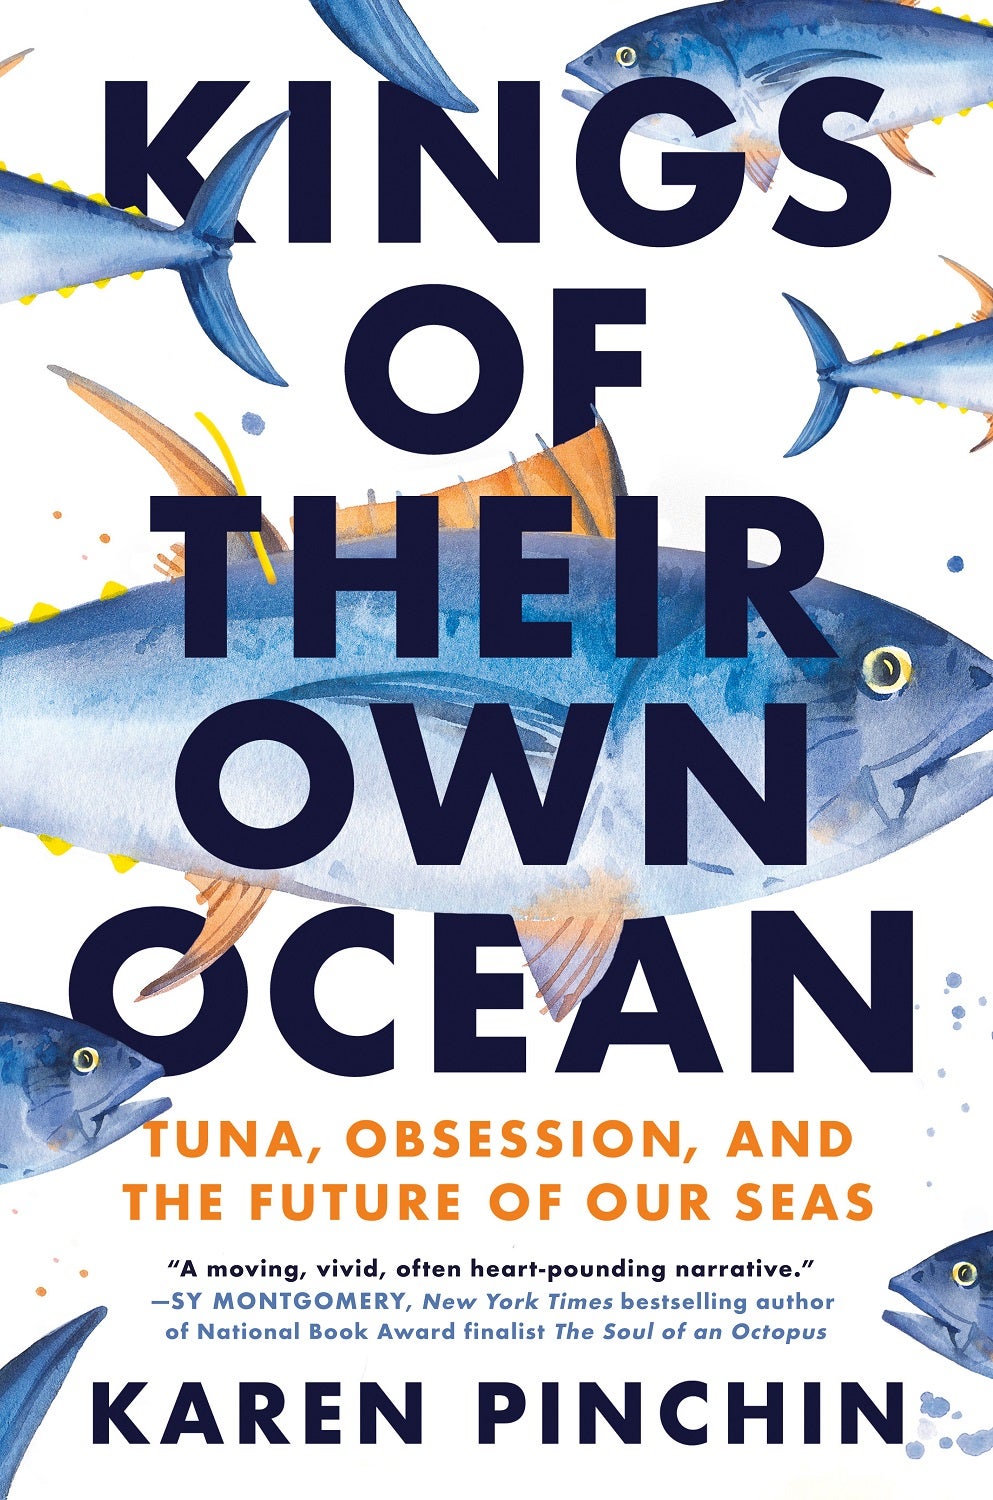 Kings their Own book cover with black and orange text and bluefin tuna illustrations